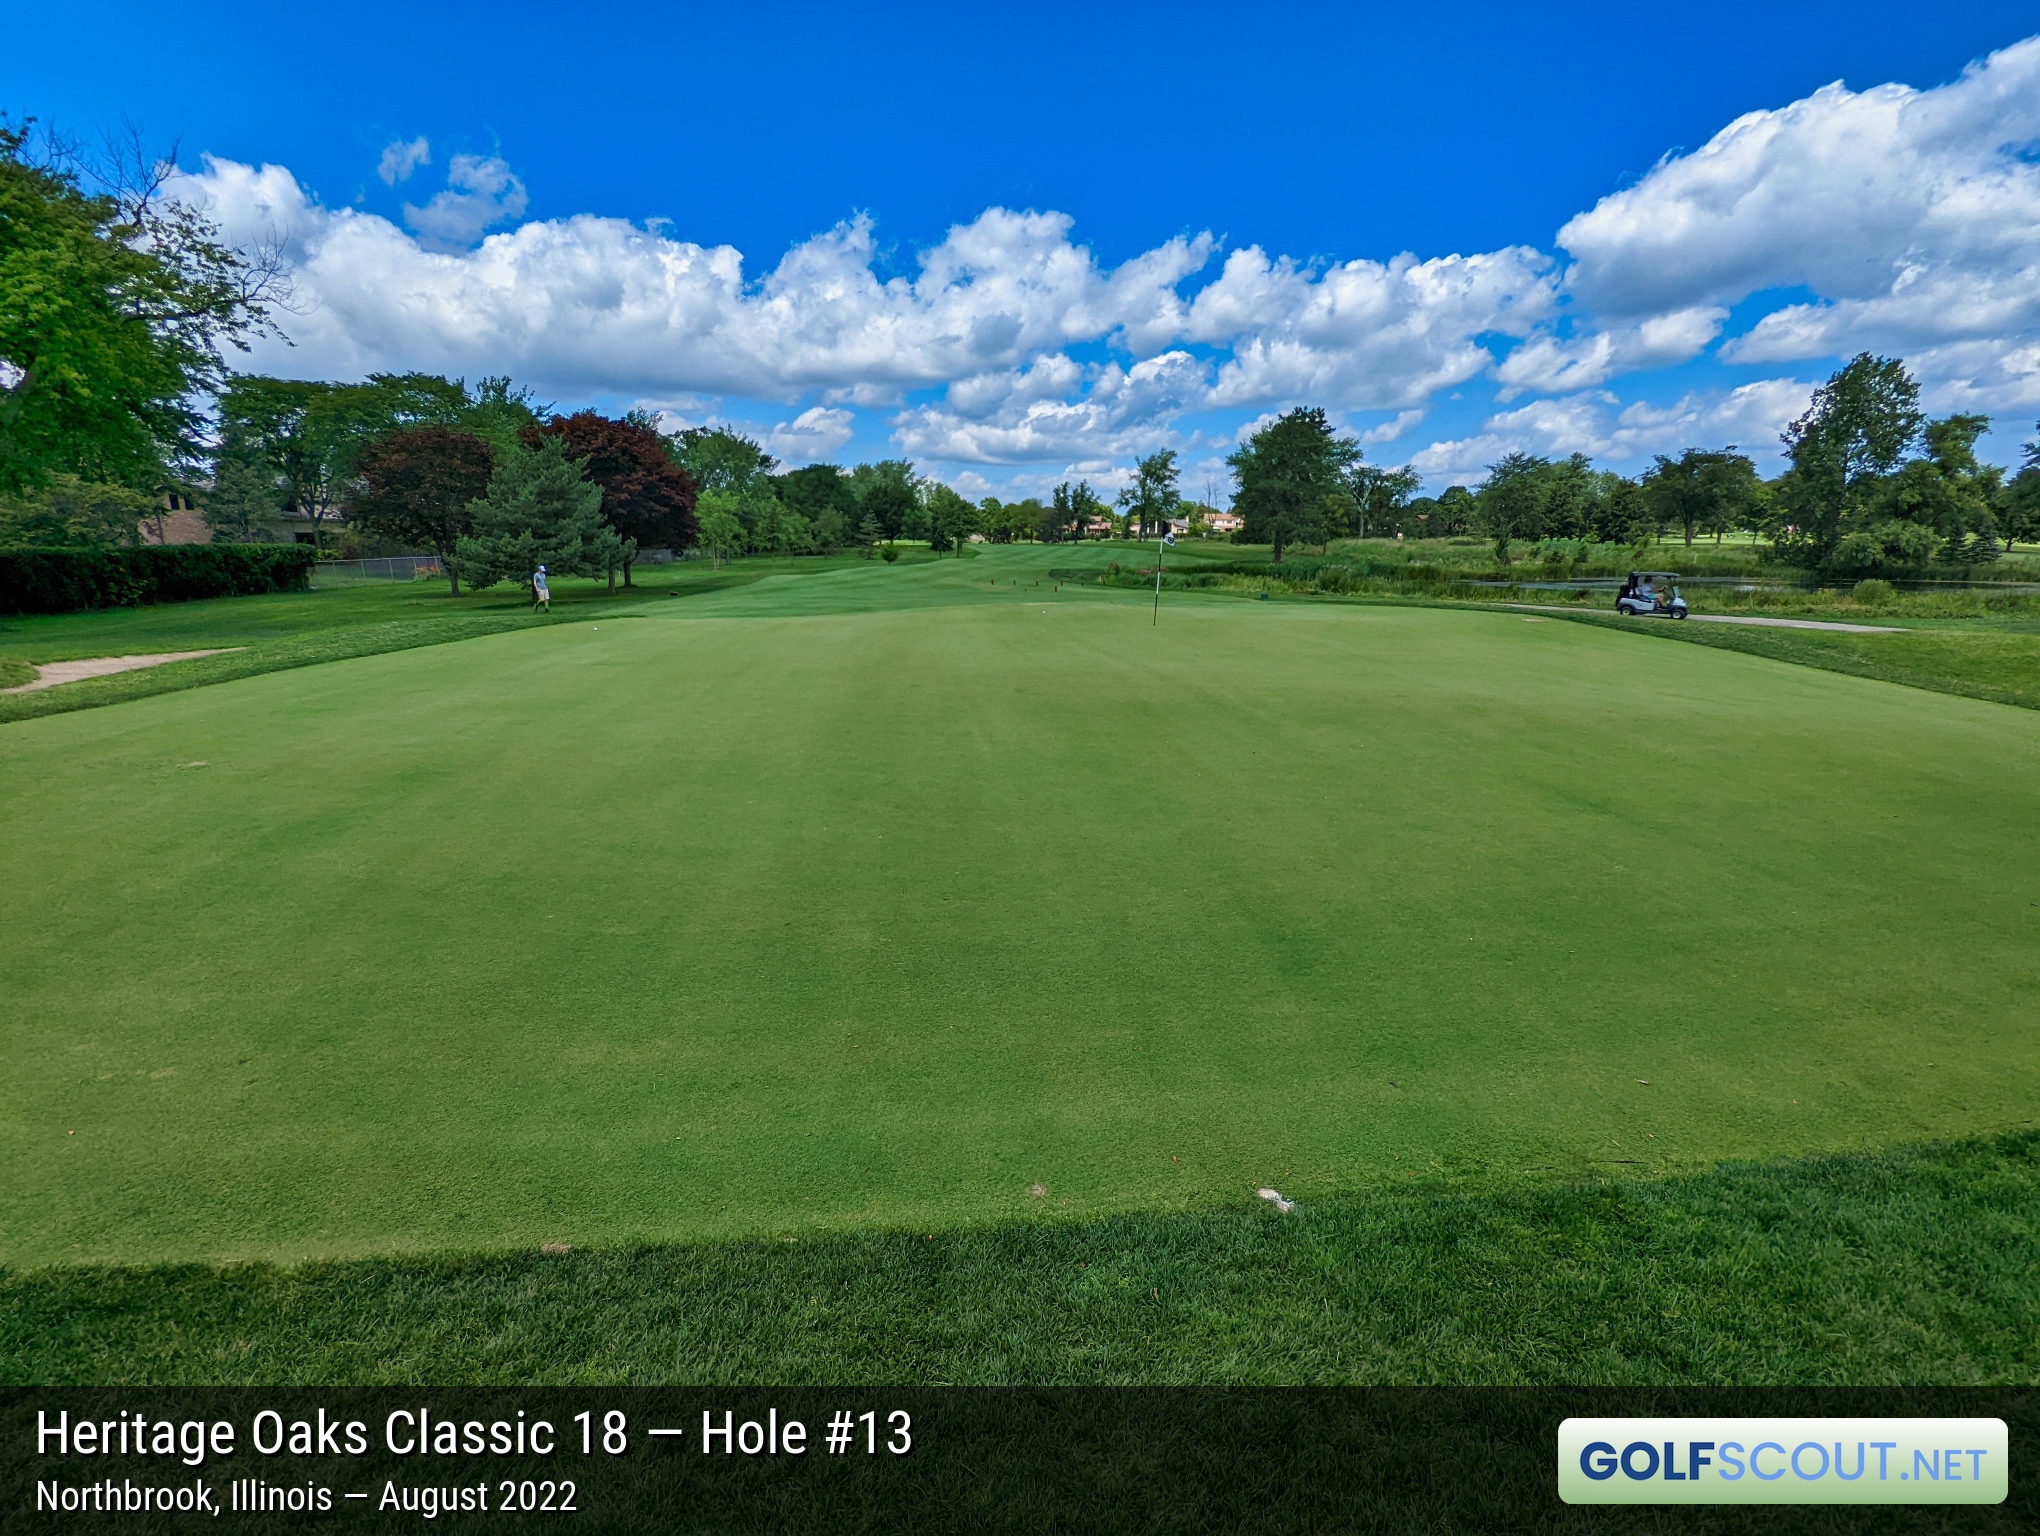 Photo of hole #13 at Heritage Oaks Golf Club - Classic 18 in Northbrook, Illinois. 